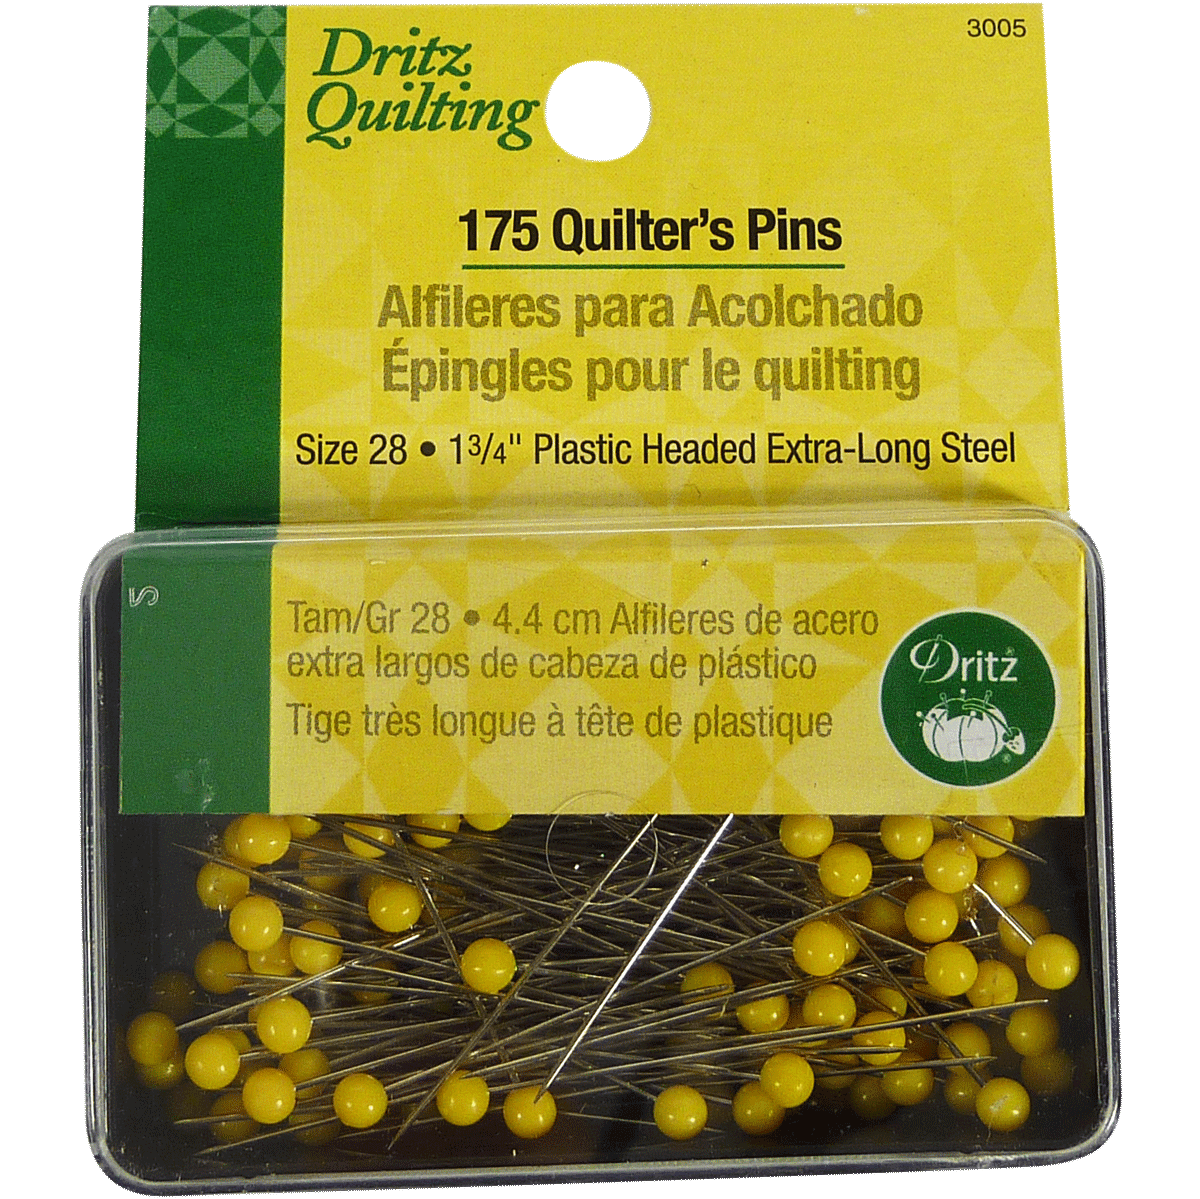 175 Quilter's Pins - Dritz Quilting